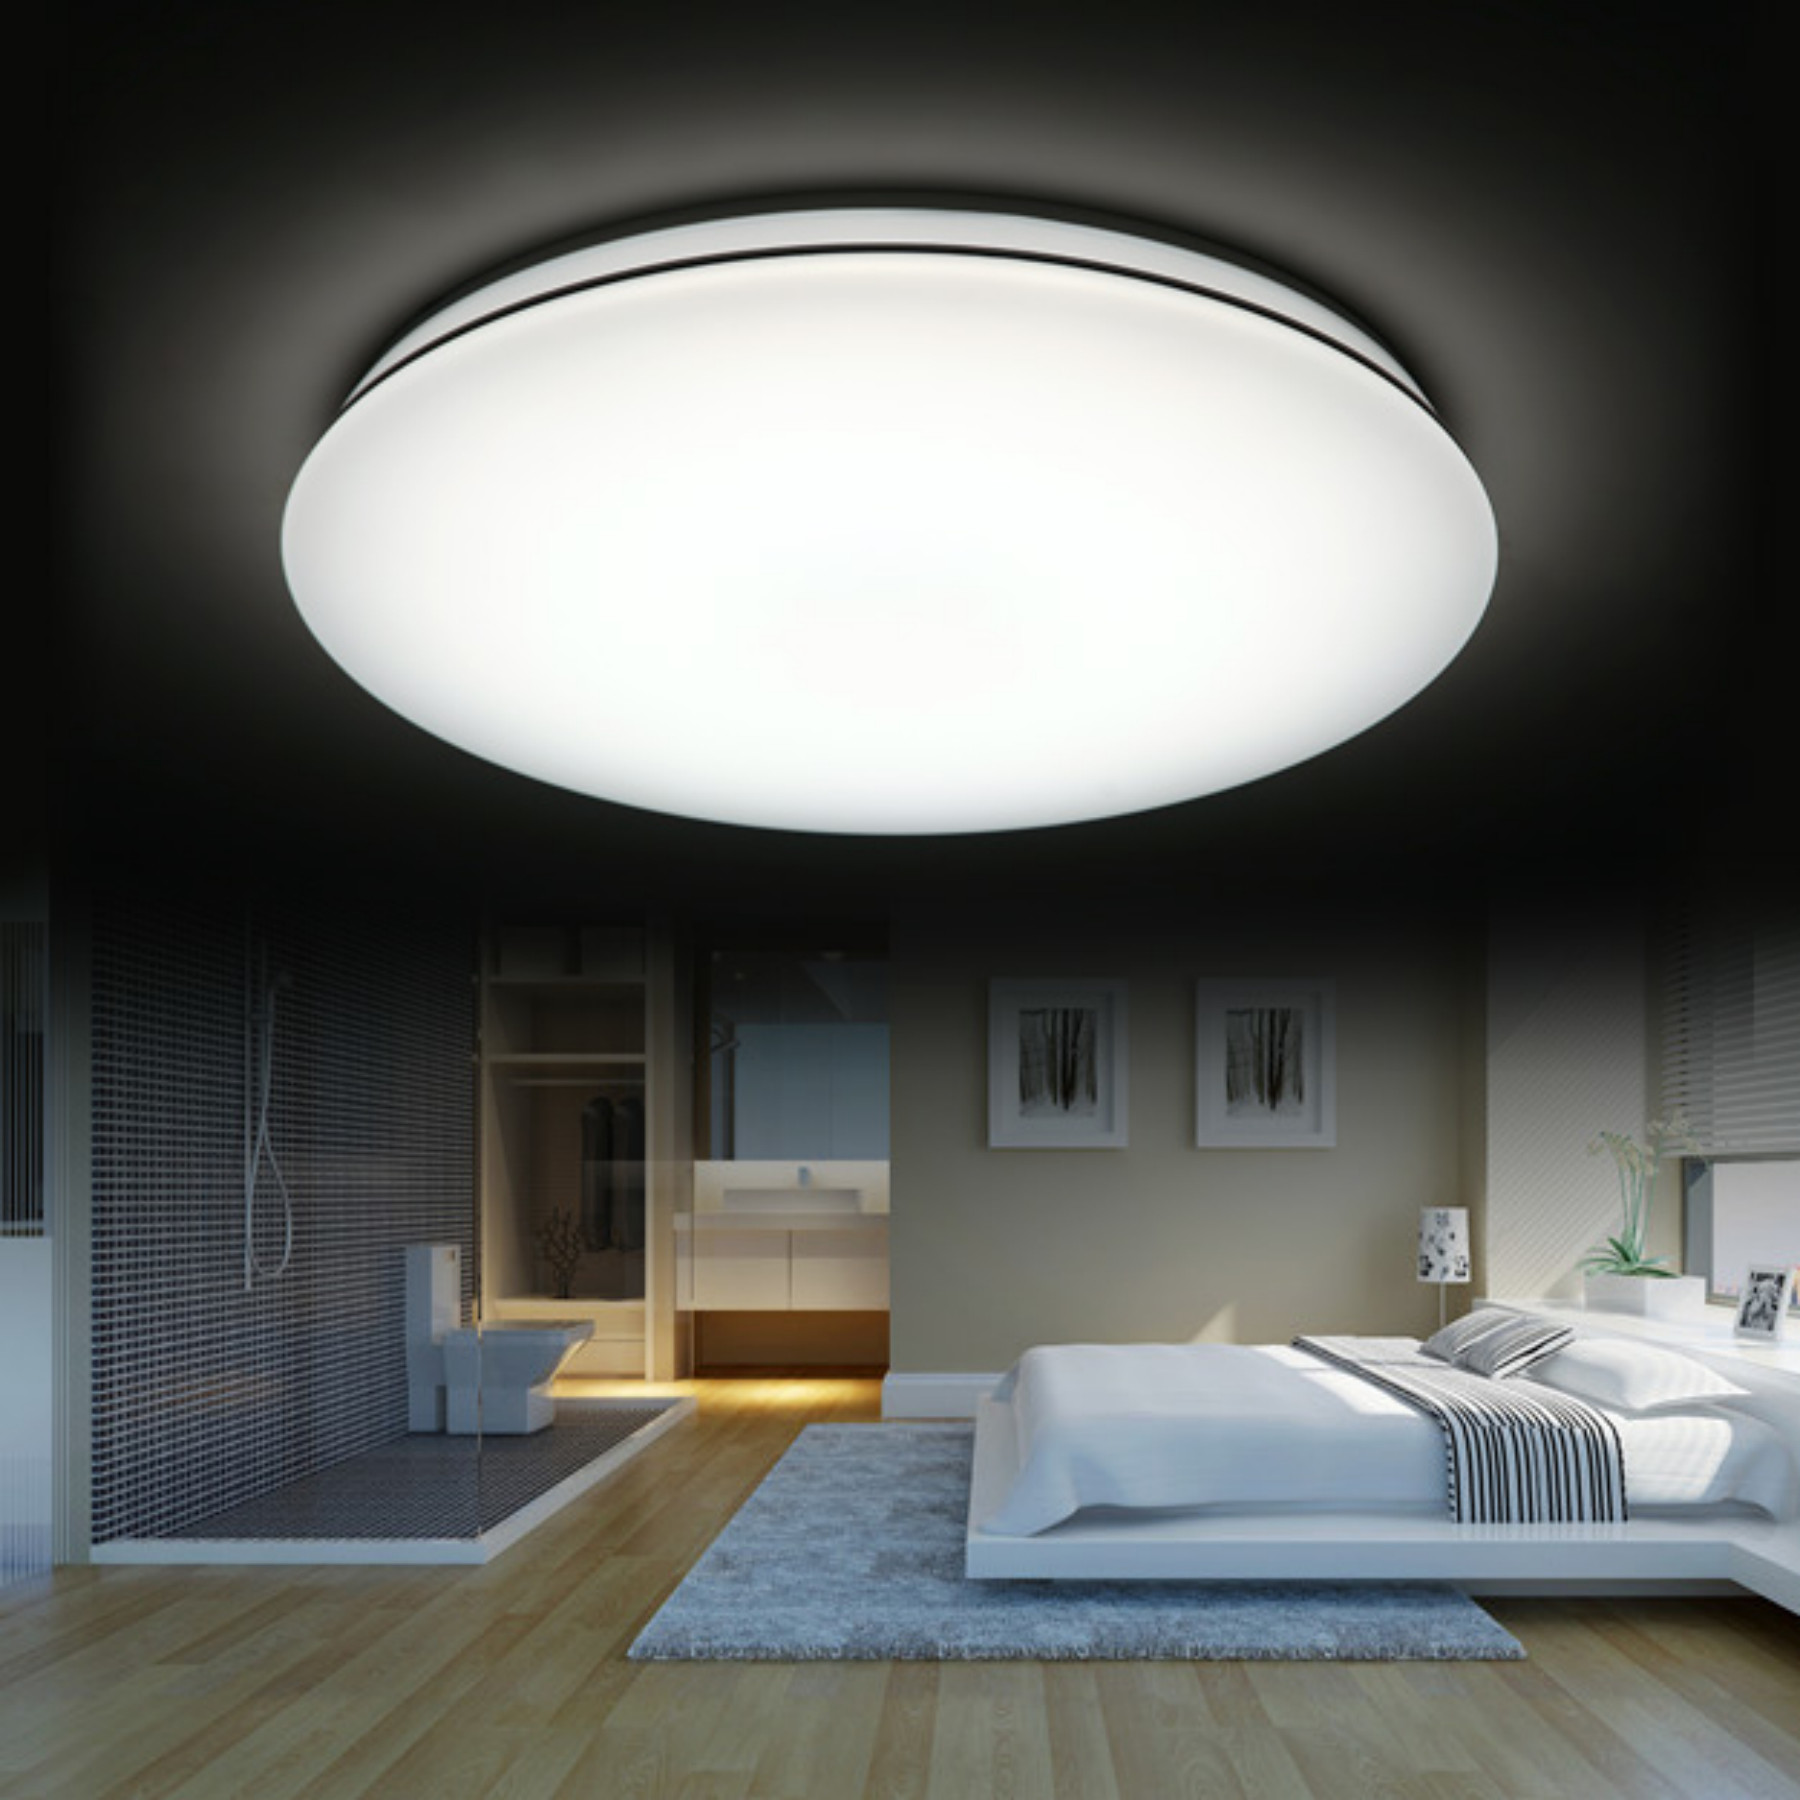 High Brightness Ceiling Mounted Luminaire High Power Factor Without Ripple Wave